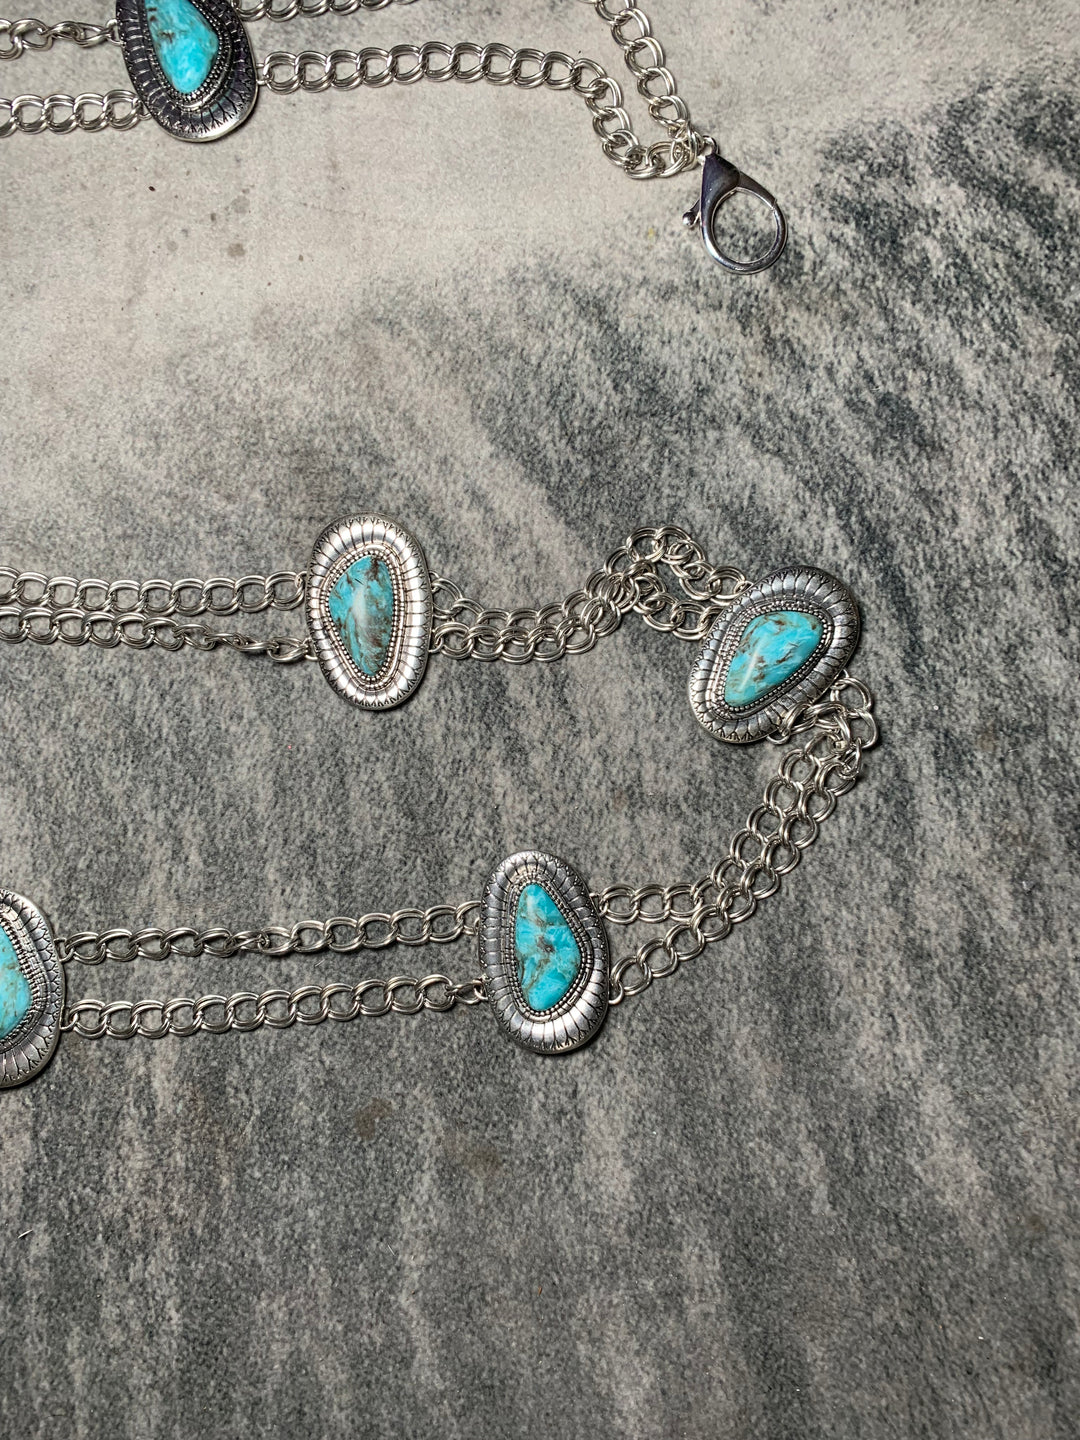 Silver and Turquoise Chain Concho Belt